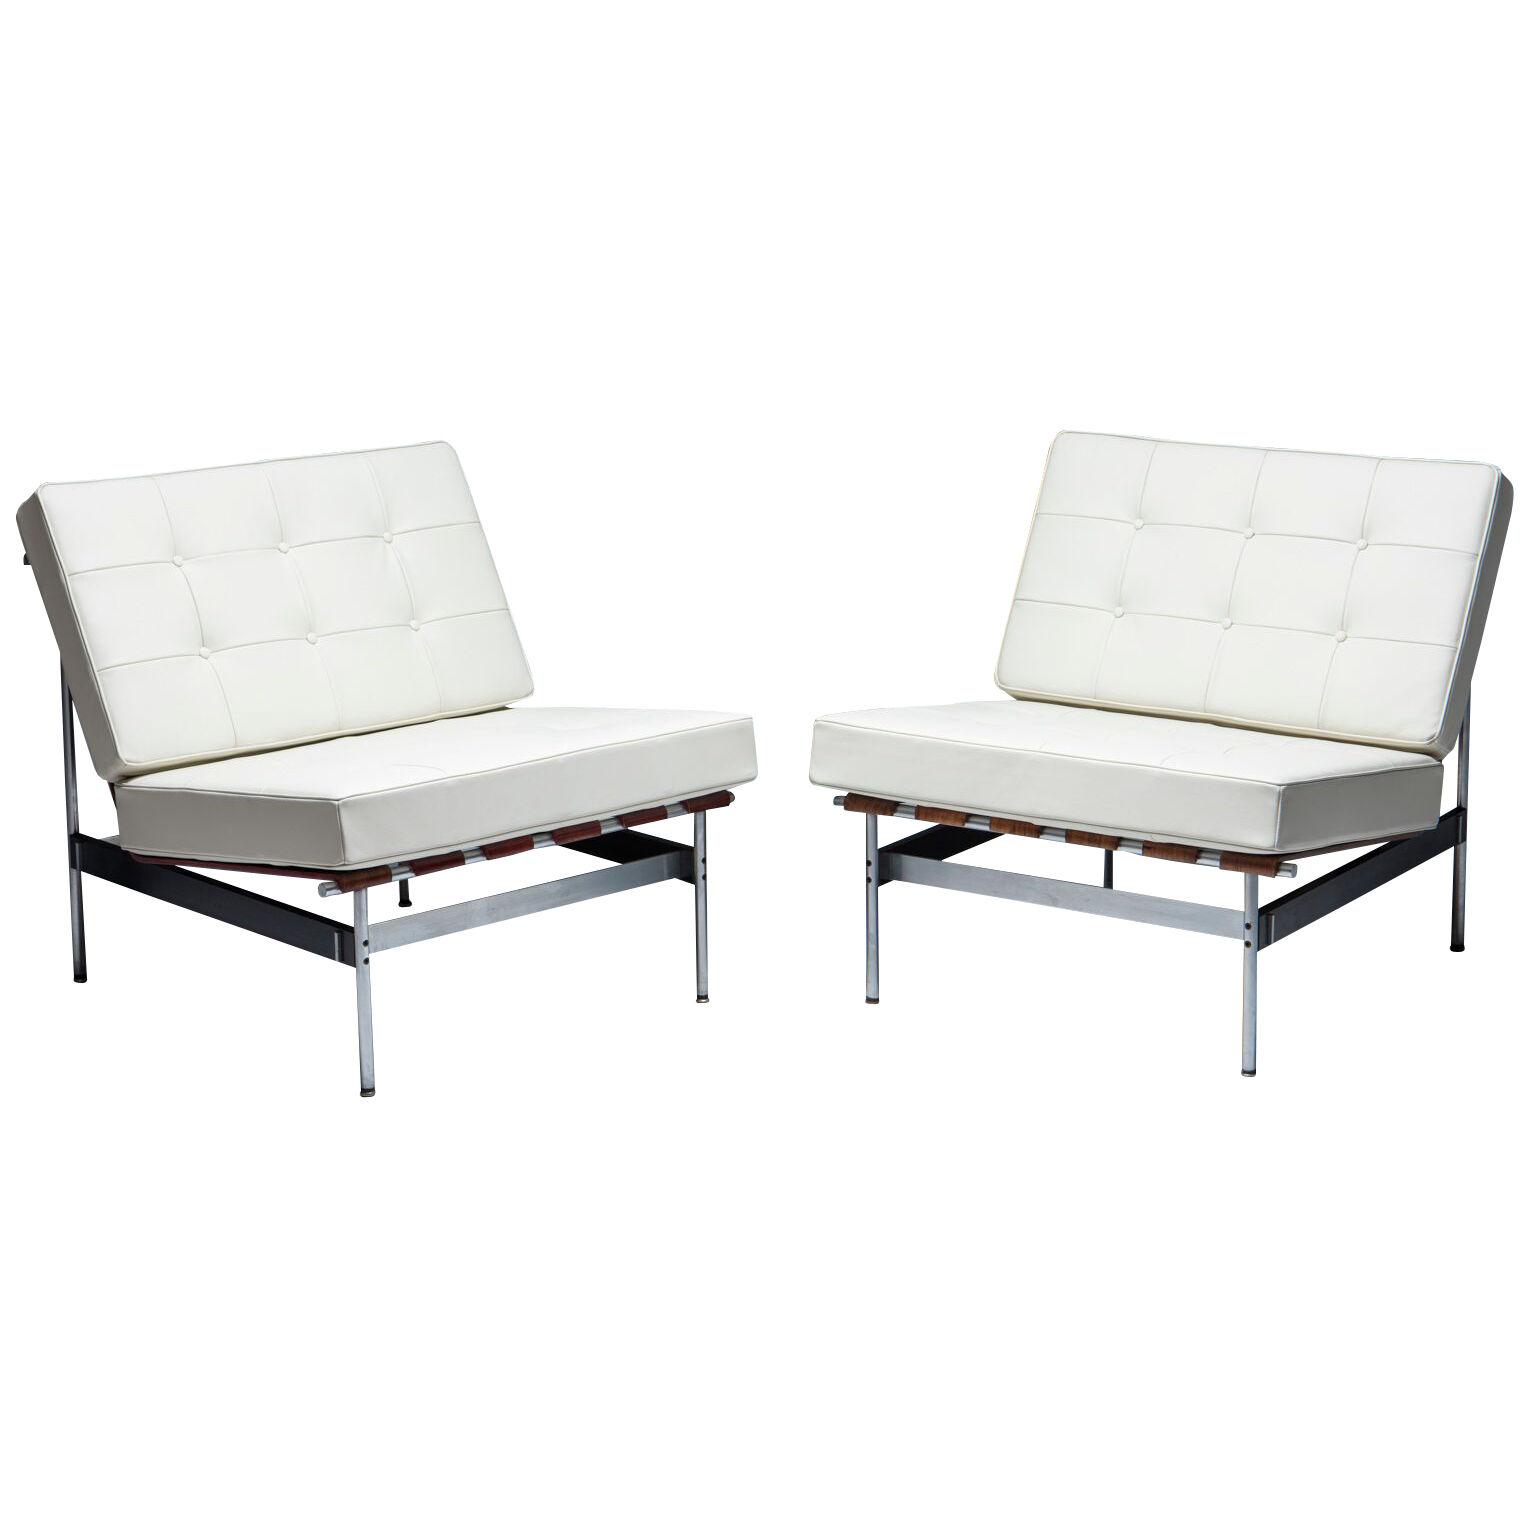 Pair of '416' Easy Chairs, Kho Liang Ie, Artifort, 1950's, The Netherlands